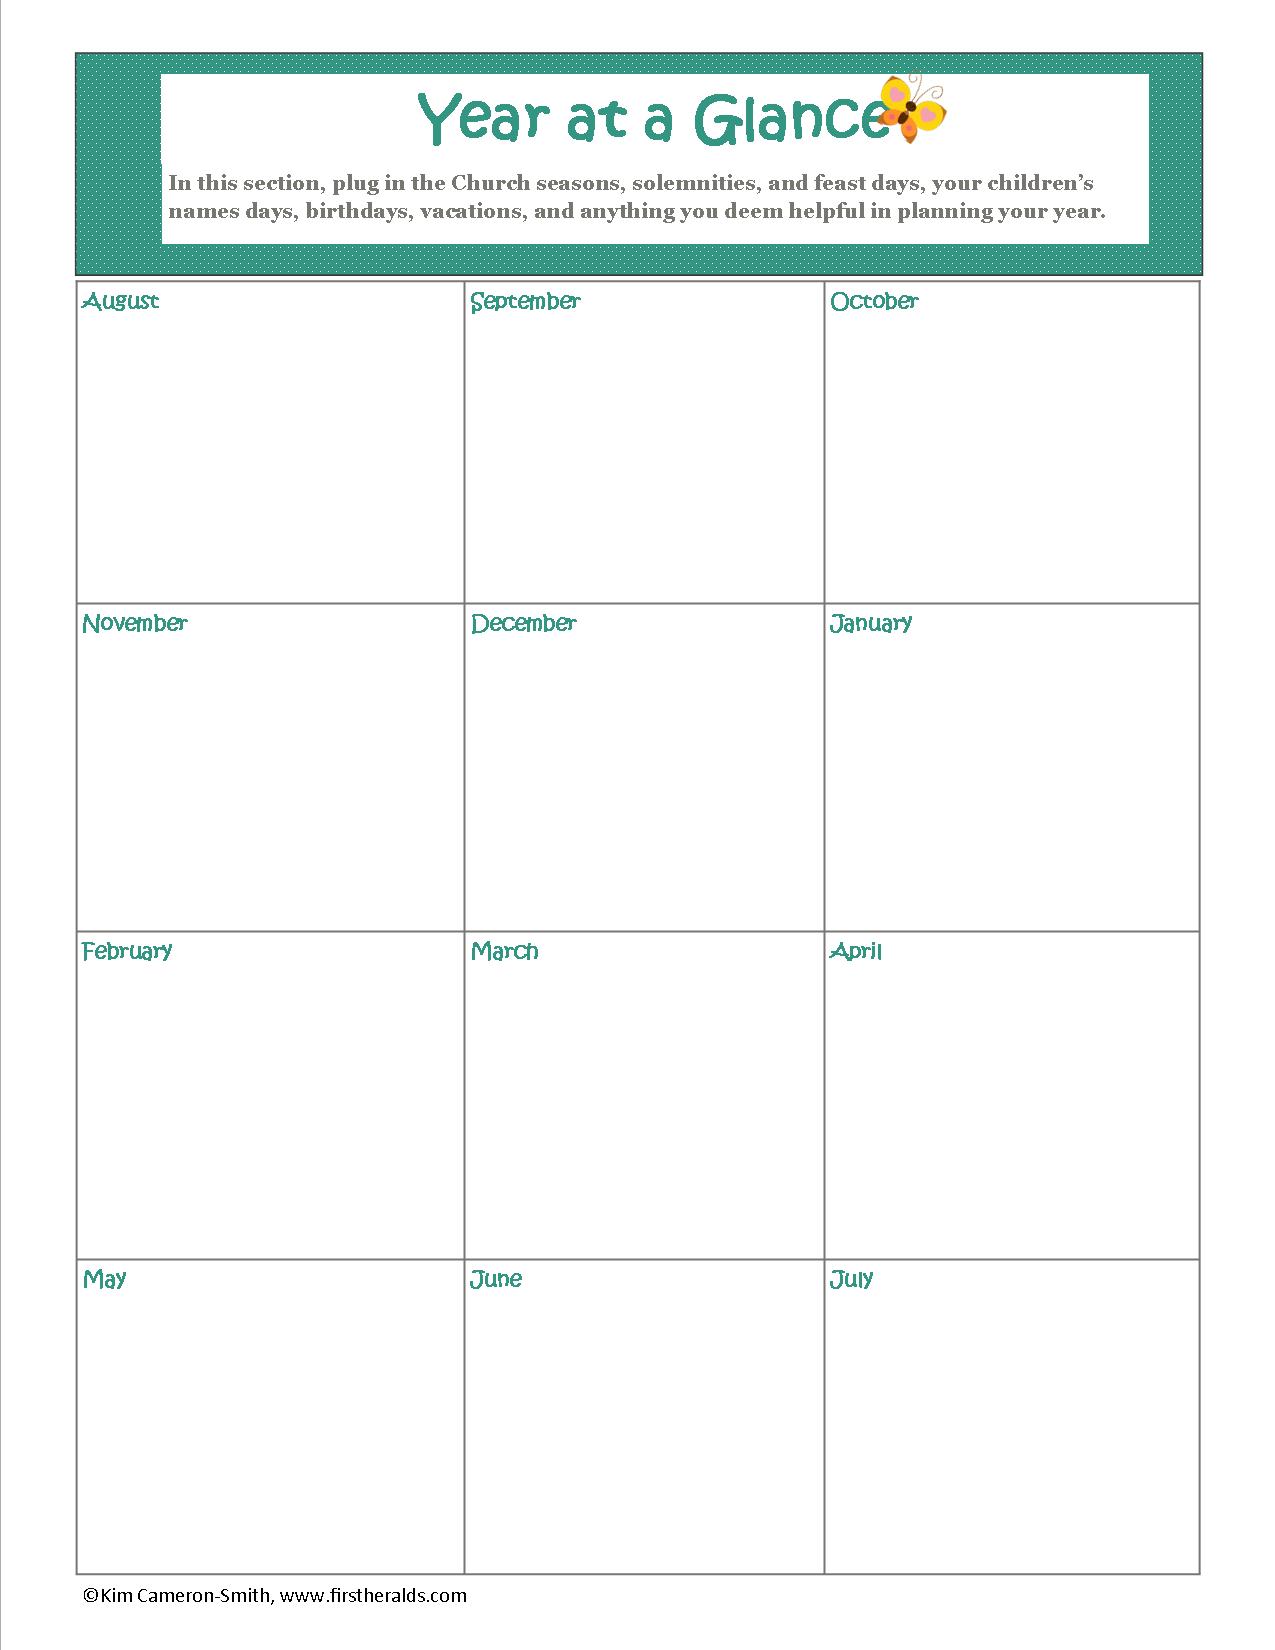 Customized Weekly Planner FIRST HERALDS